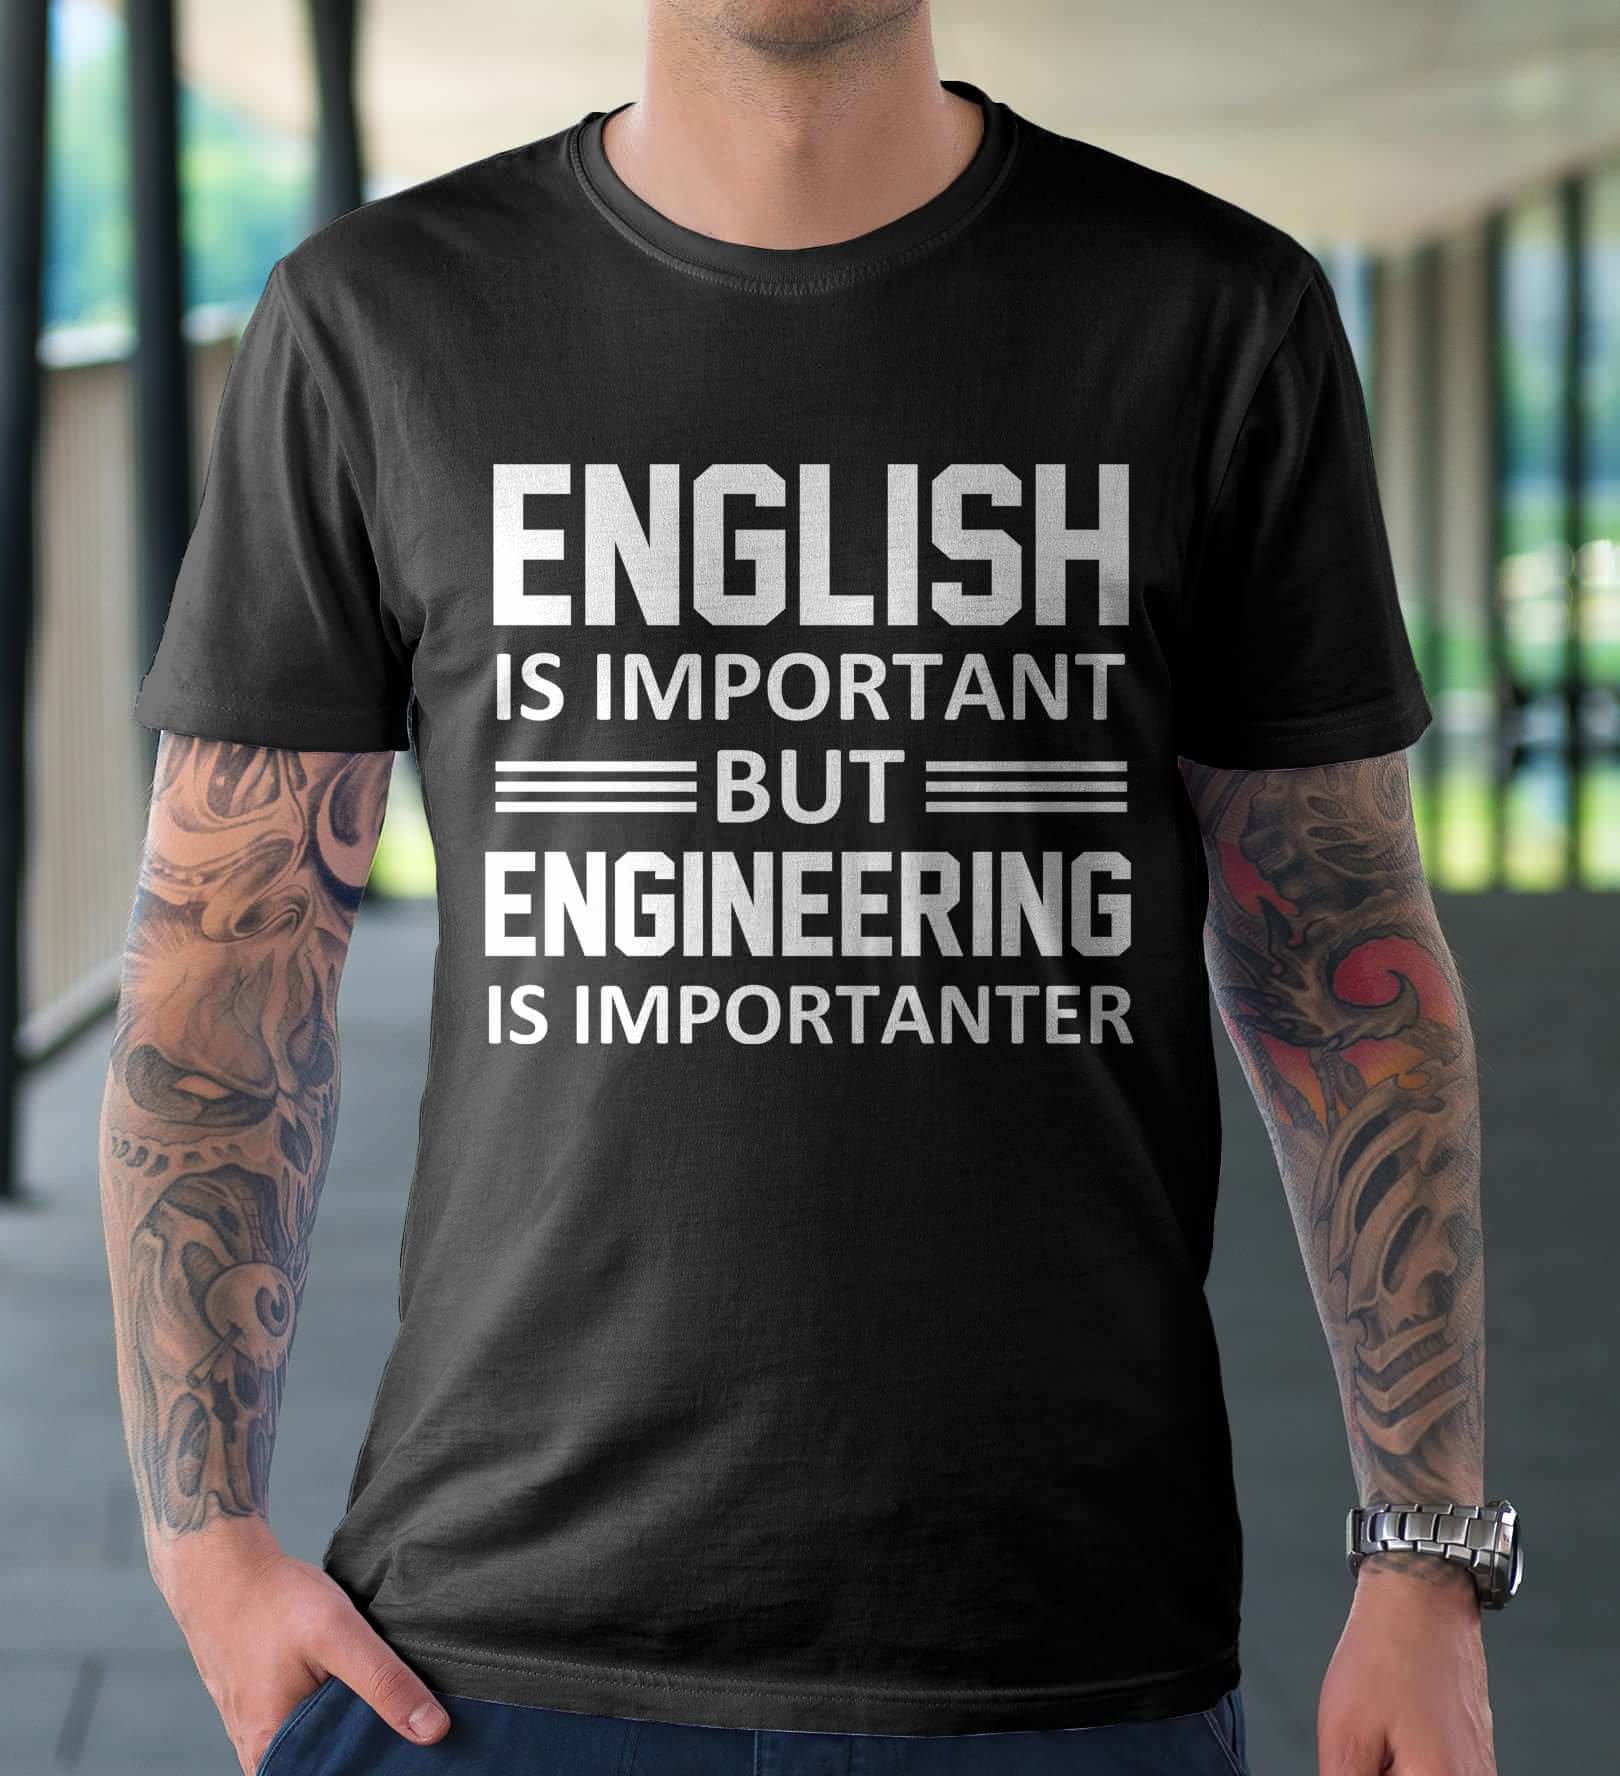 Shirt about why english is important but engineering more so.